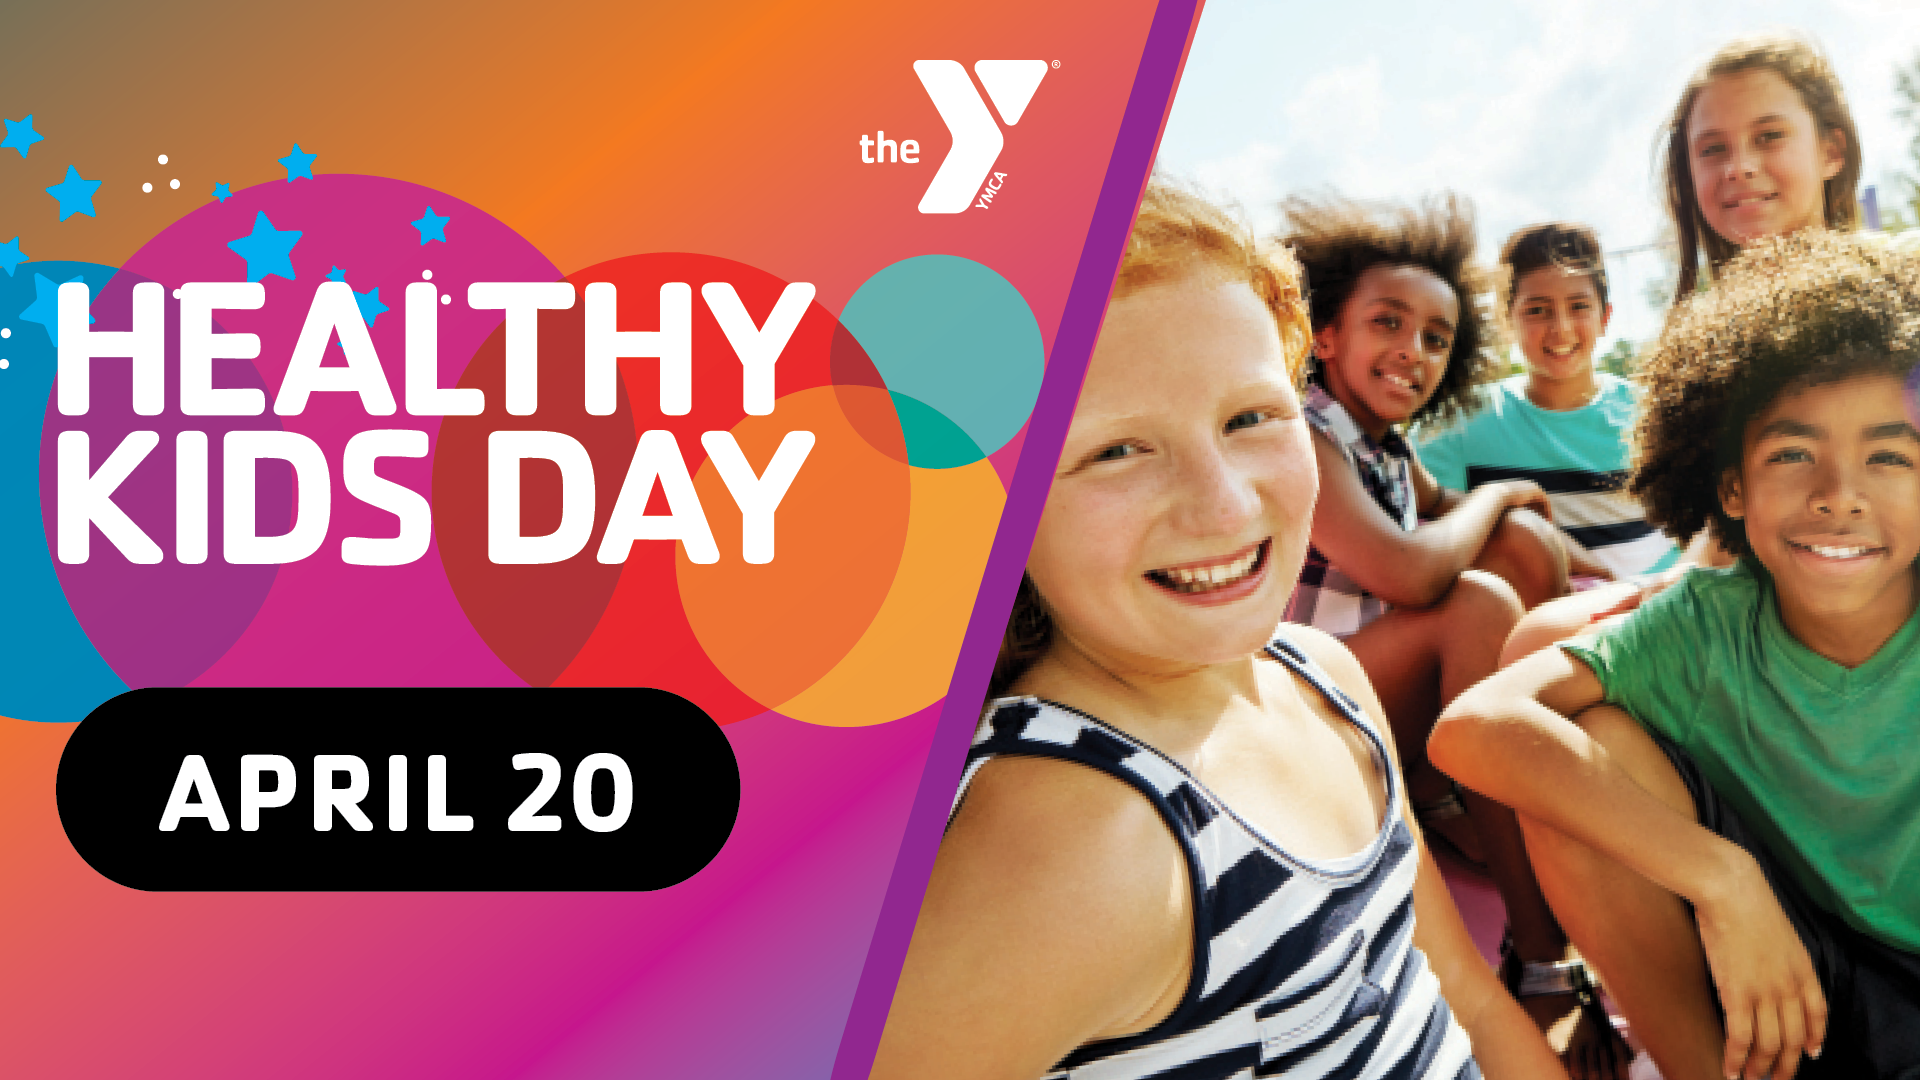 Featured image for “Healthy Kids Day”